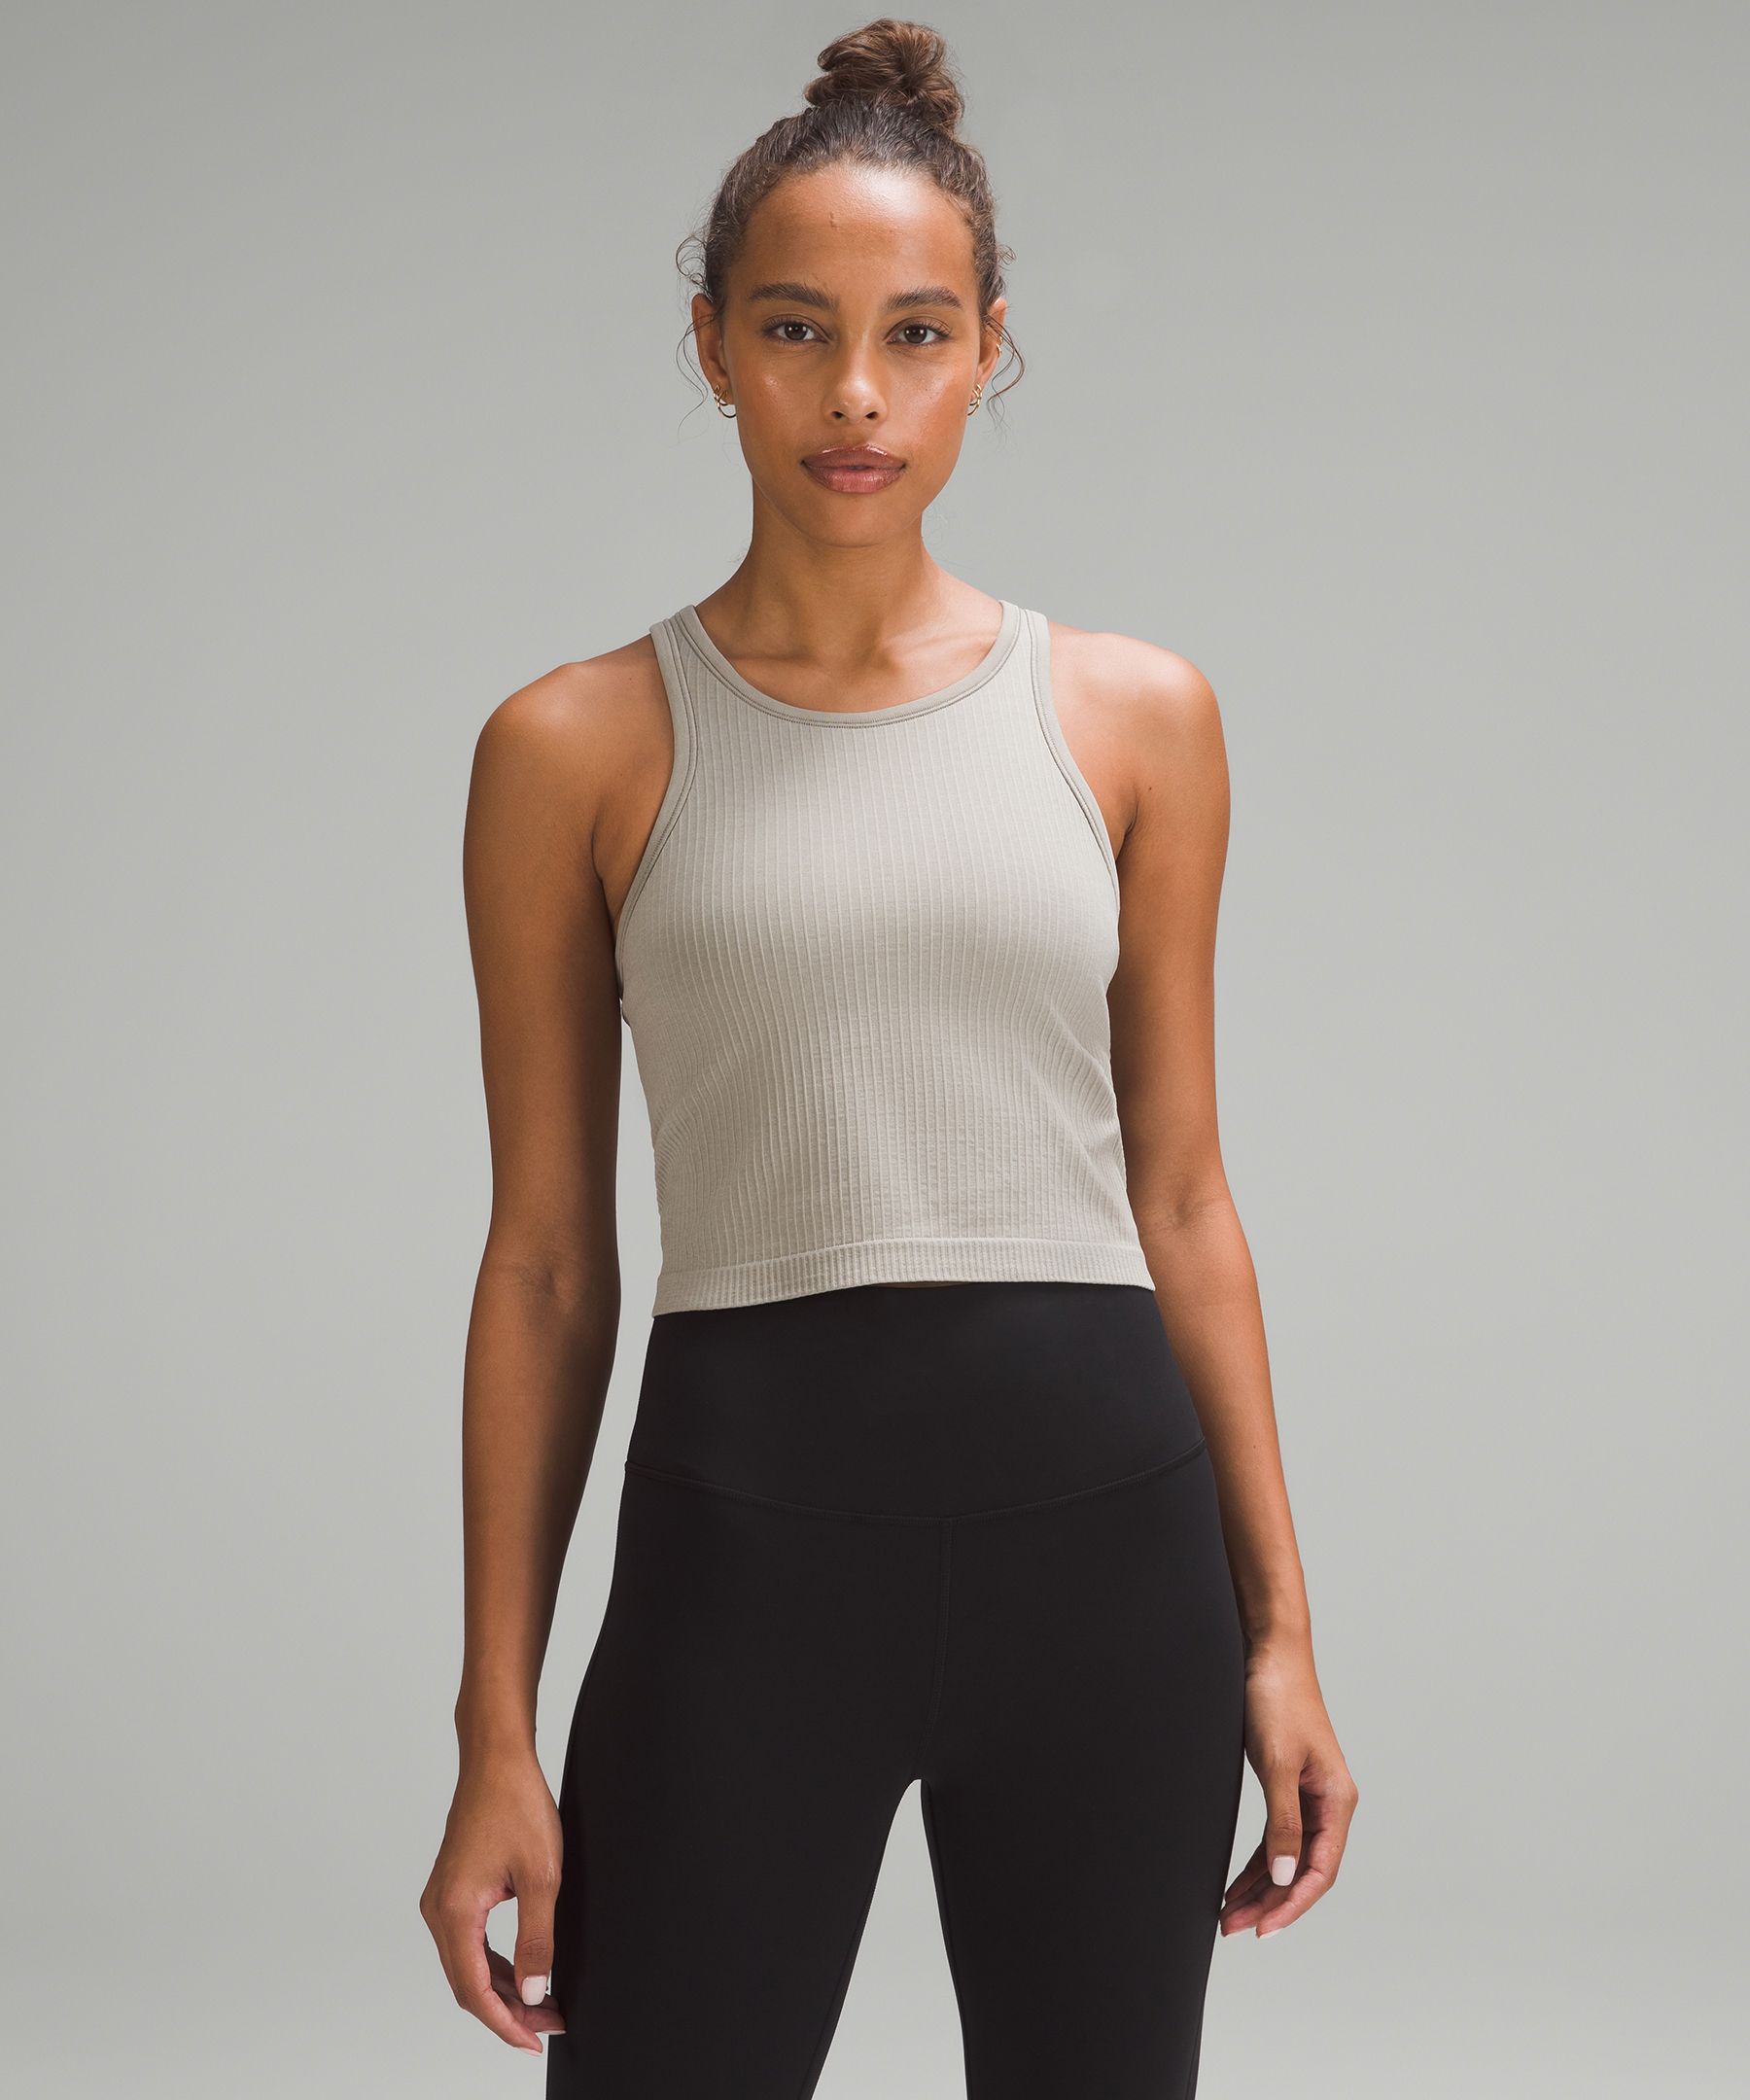 Fit Review: lululemon Align T-Shirt & Ebb to Street Cropped